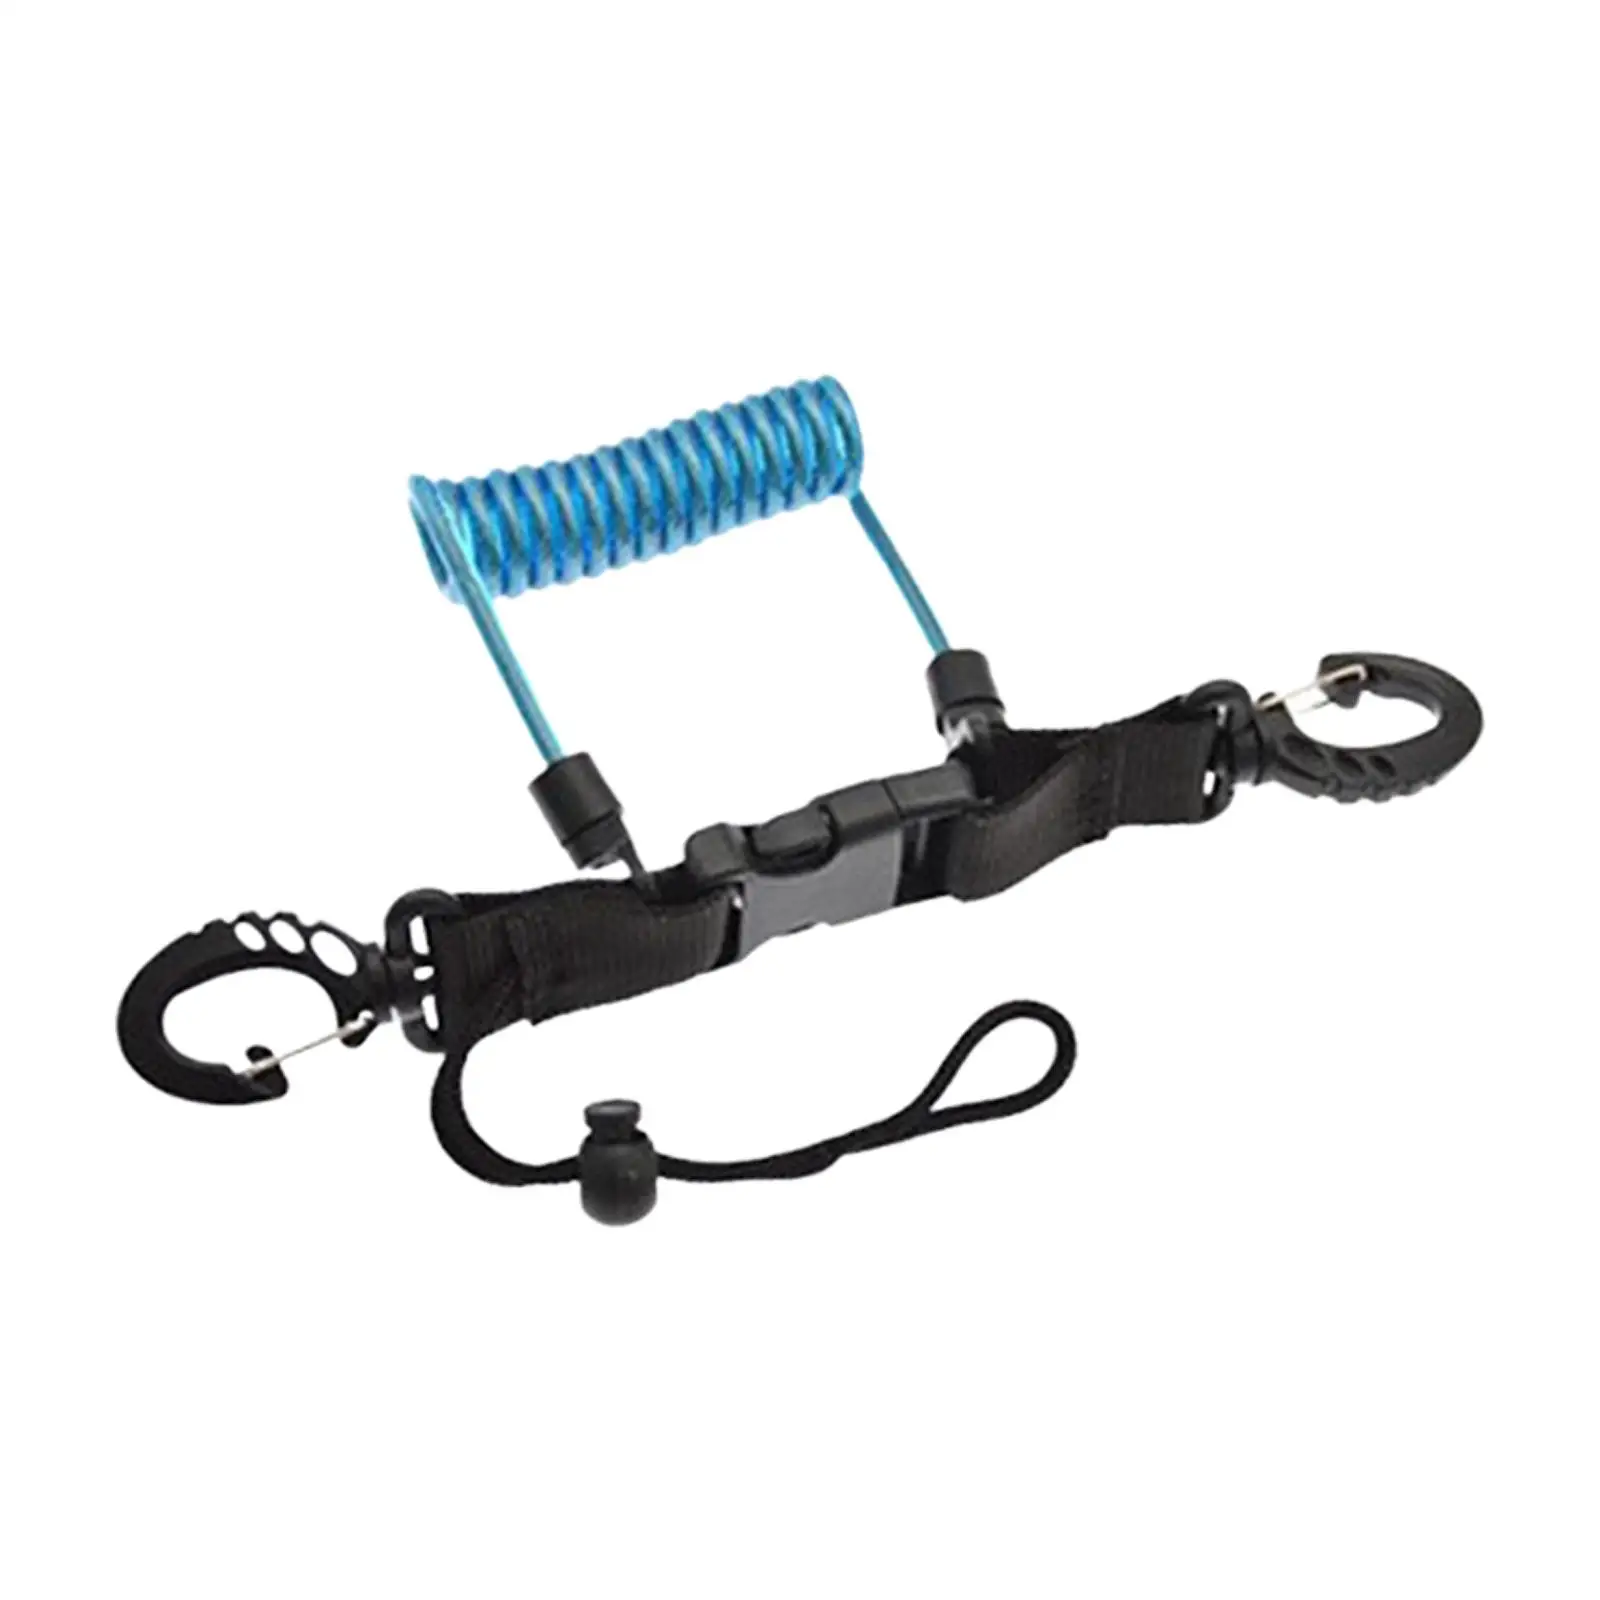 Snappy of Coil Lanyard with Clips and Quick Release Buckle Lightweight Durable